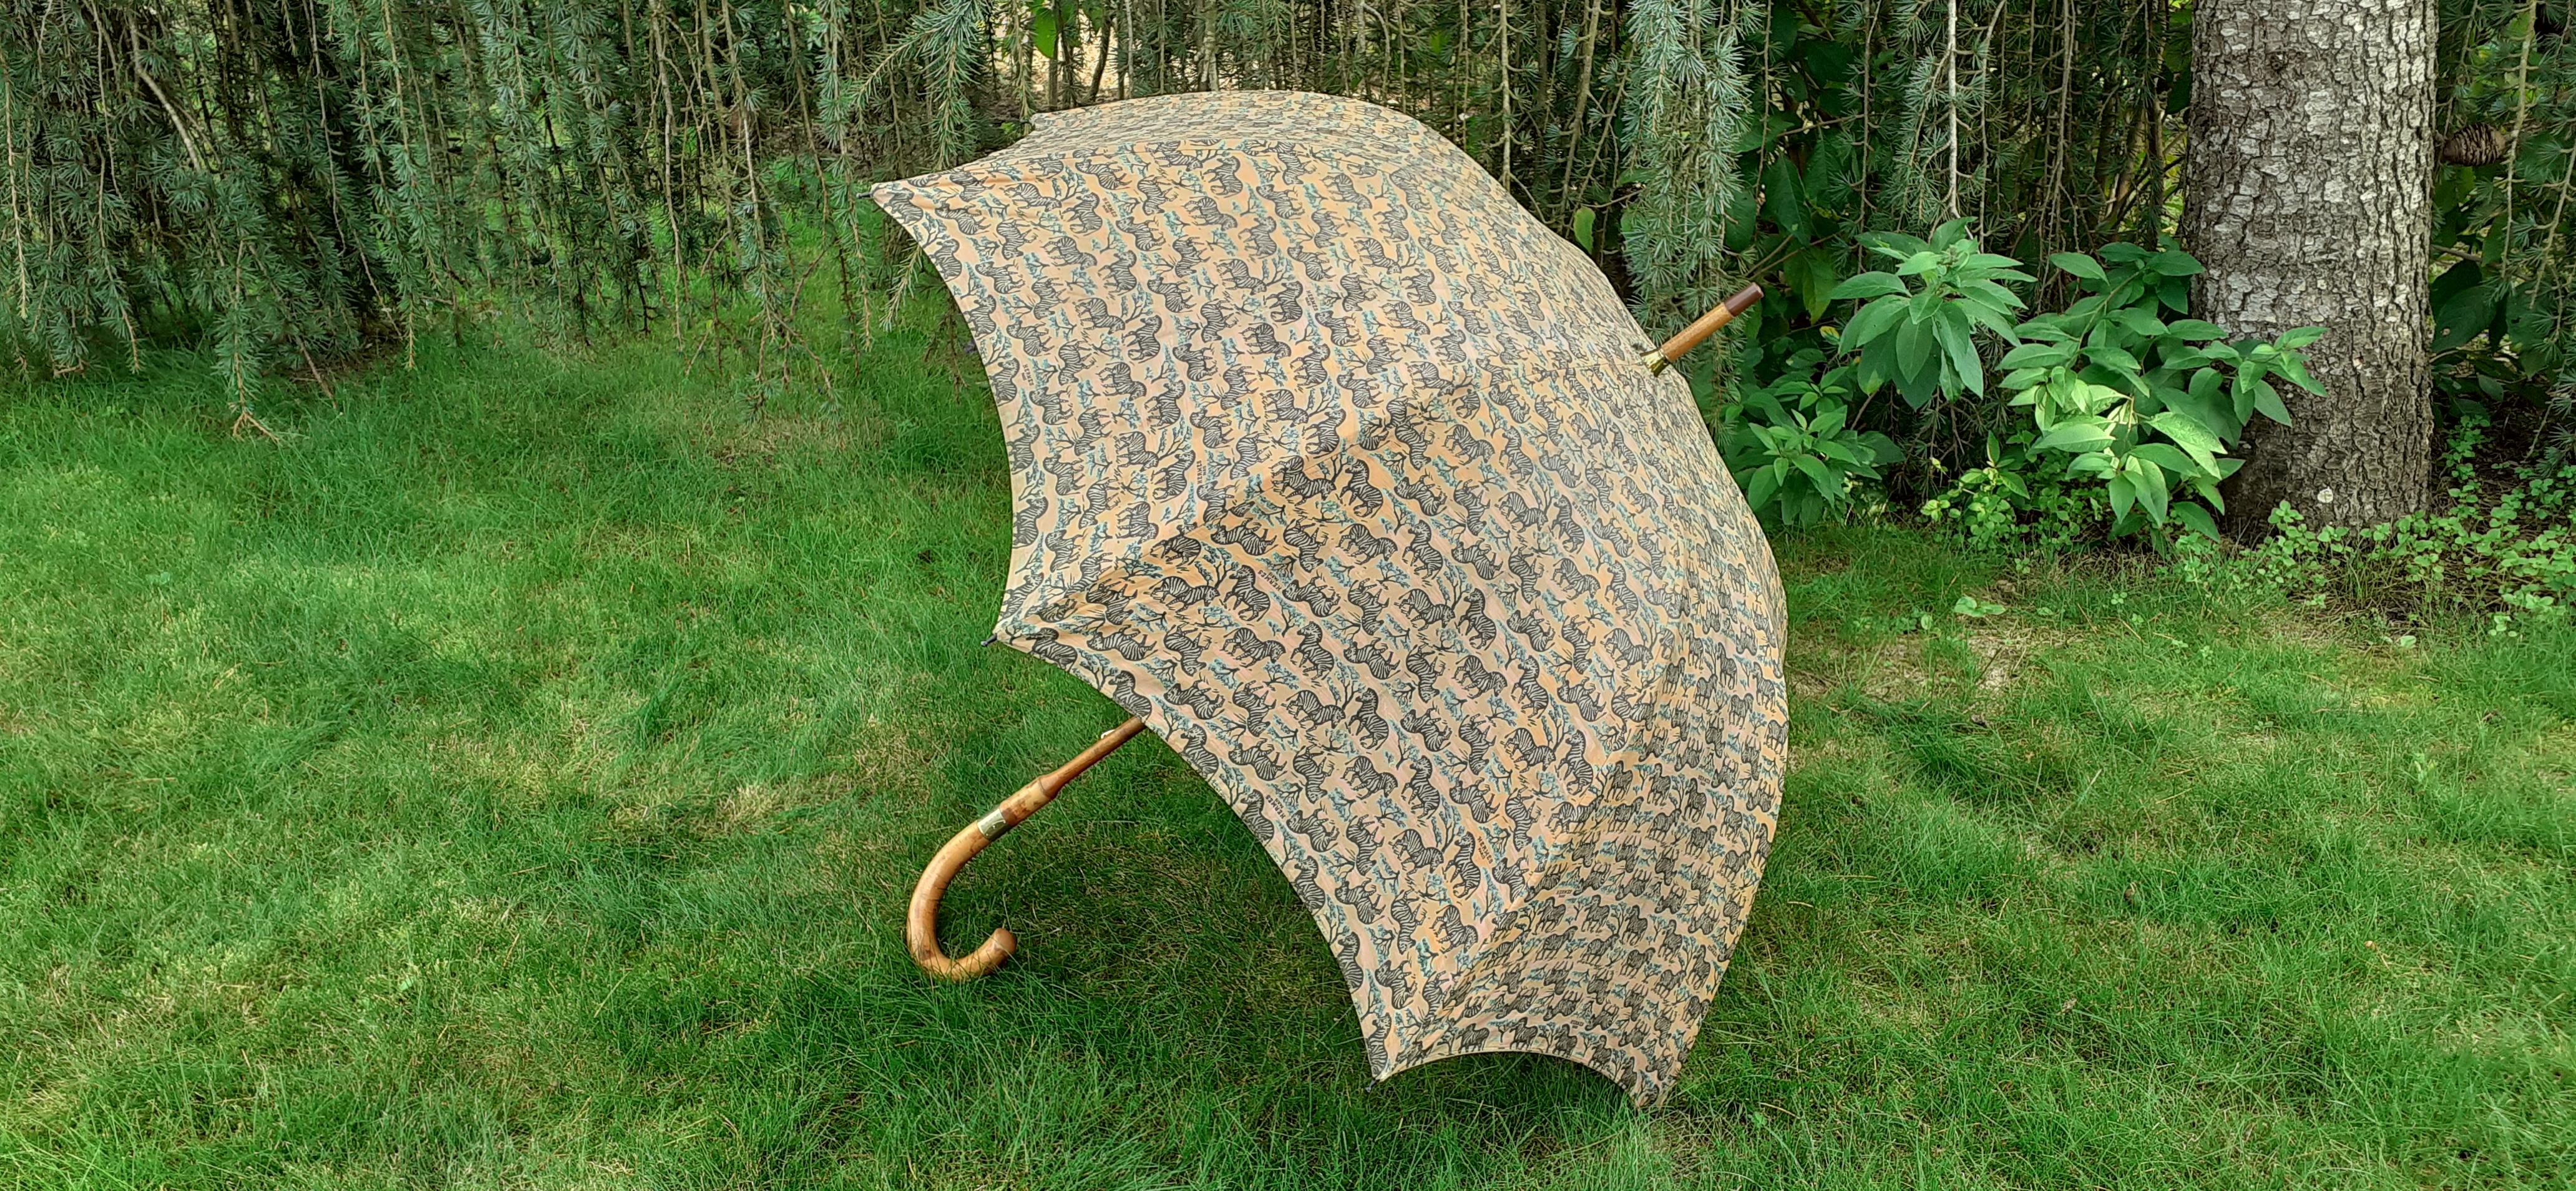 Rare and Lovely Authentic Hermès Umbrella

Print: Zebras

Vintage Item from 1988, 